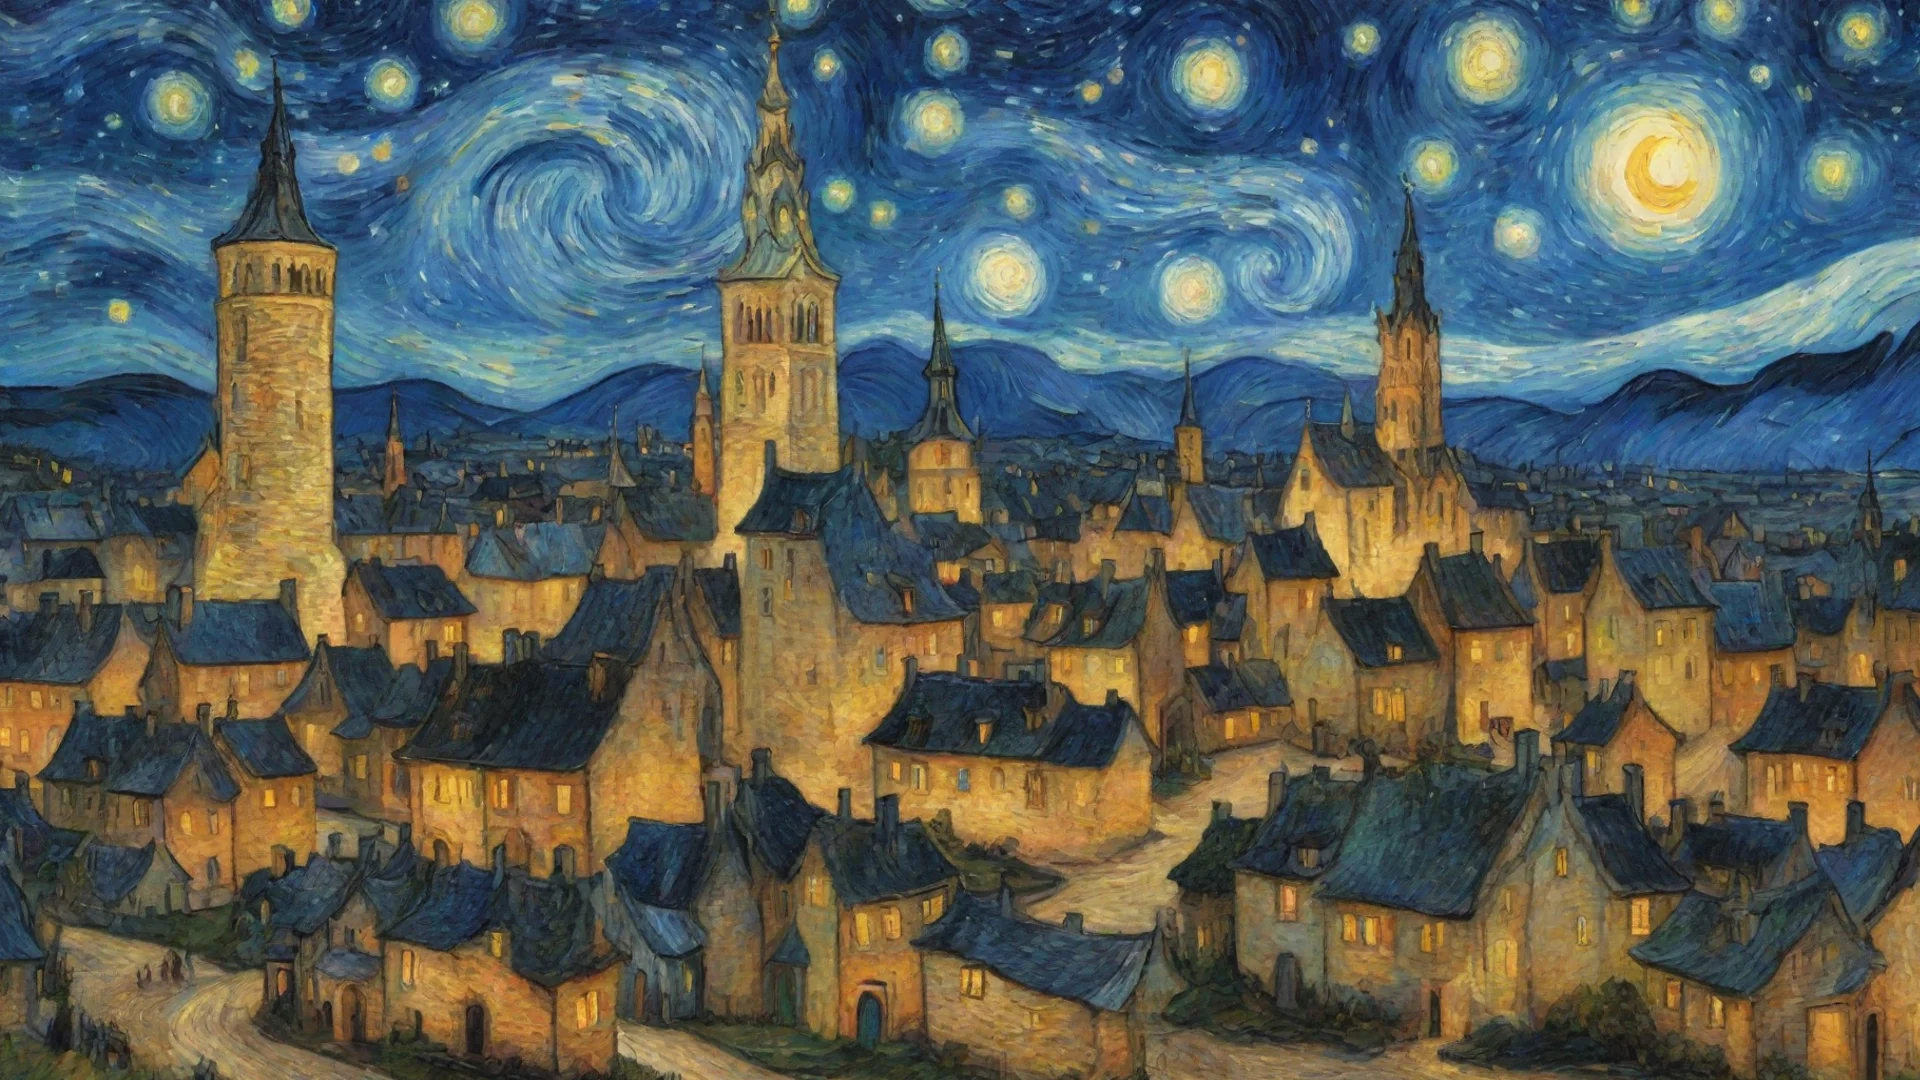 aiamazing artistic van gogh village at night starry spiraling towers amazing hd aesthetic awesome portrait 2 wide